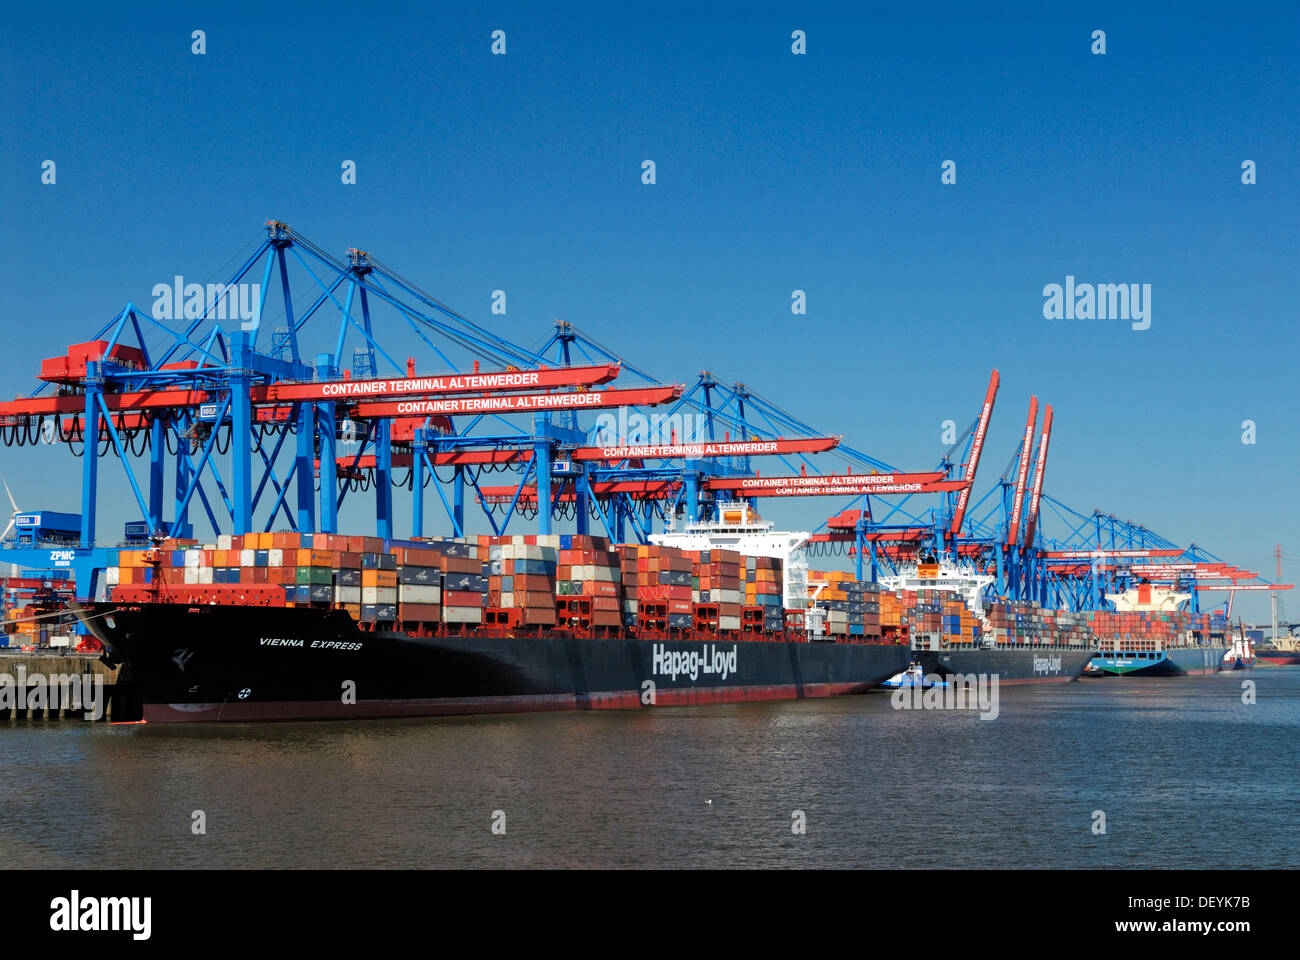 Container freighters at Container Terminal Altenwerder in Hamburg Stock Photo